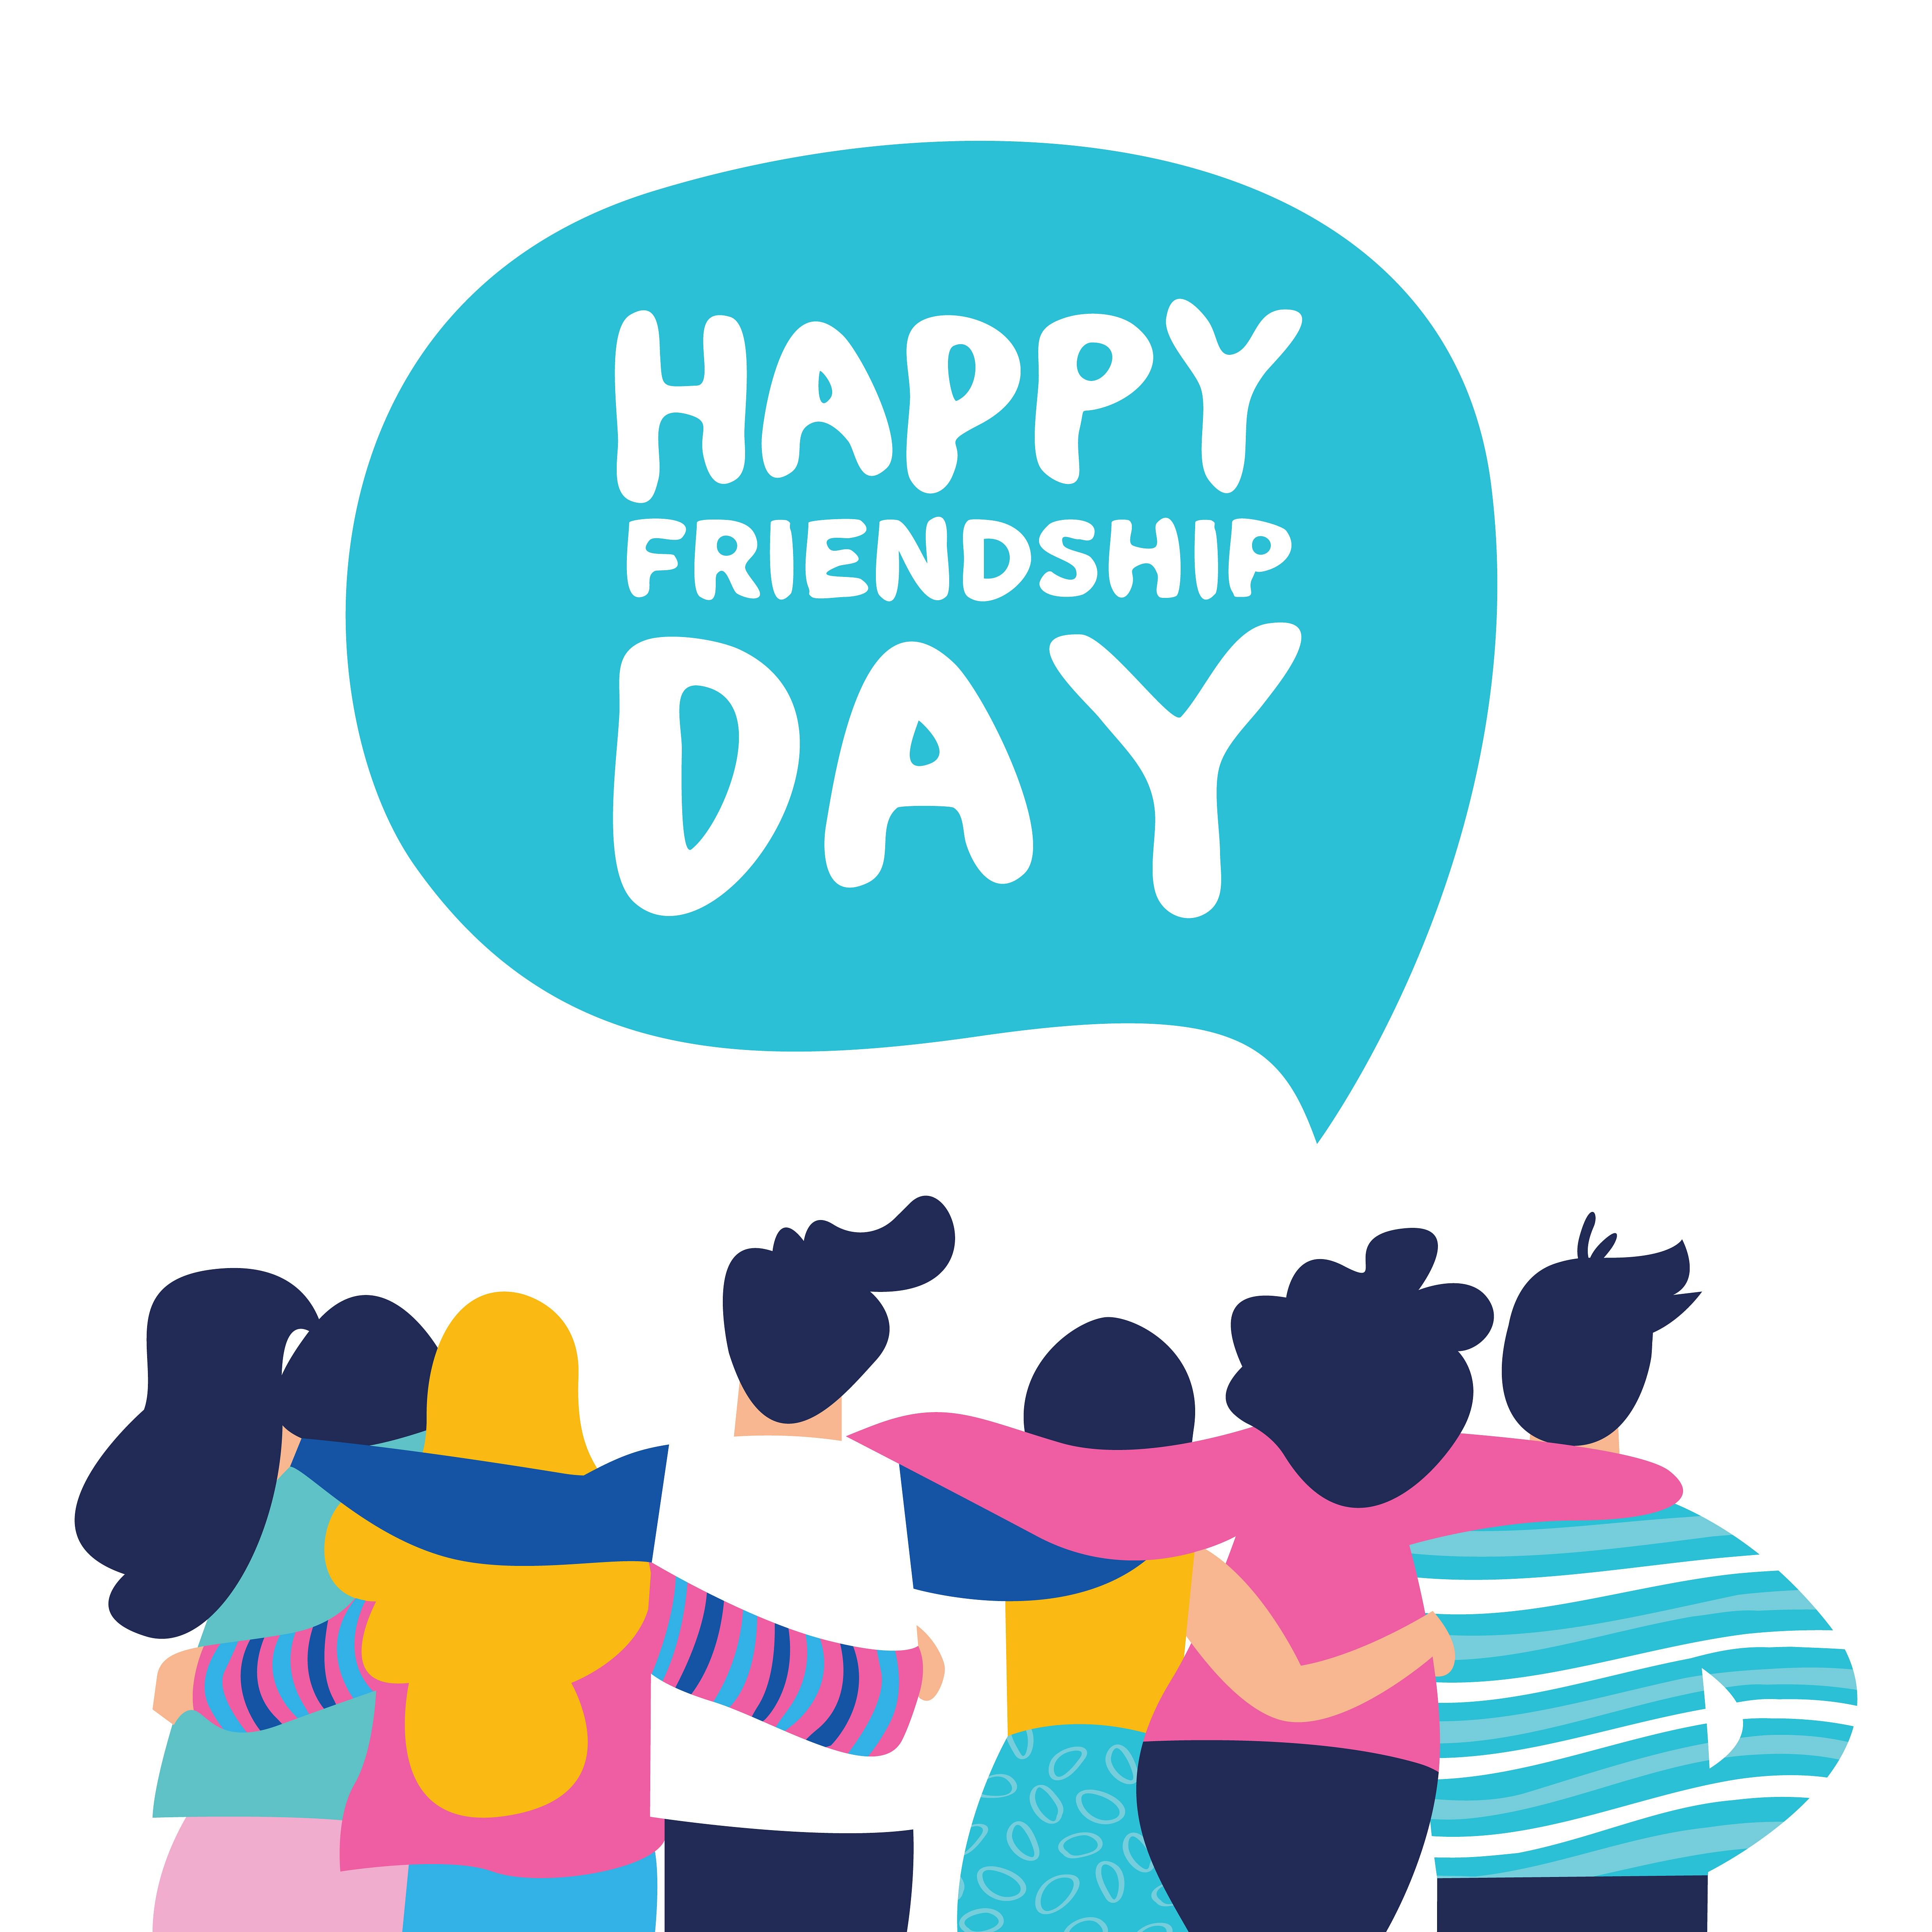 Happy Friendship Day 2021 Wishes Image, Cards, WhatsApp Stickers, Status, HD Wallpaper and photo to send to your friend on Friendship Day